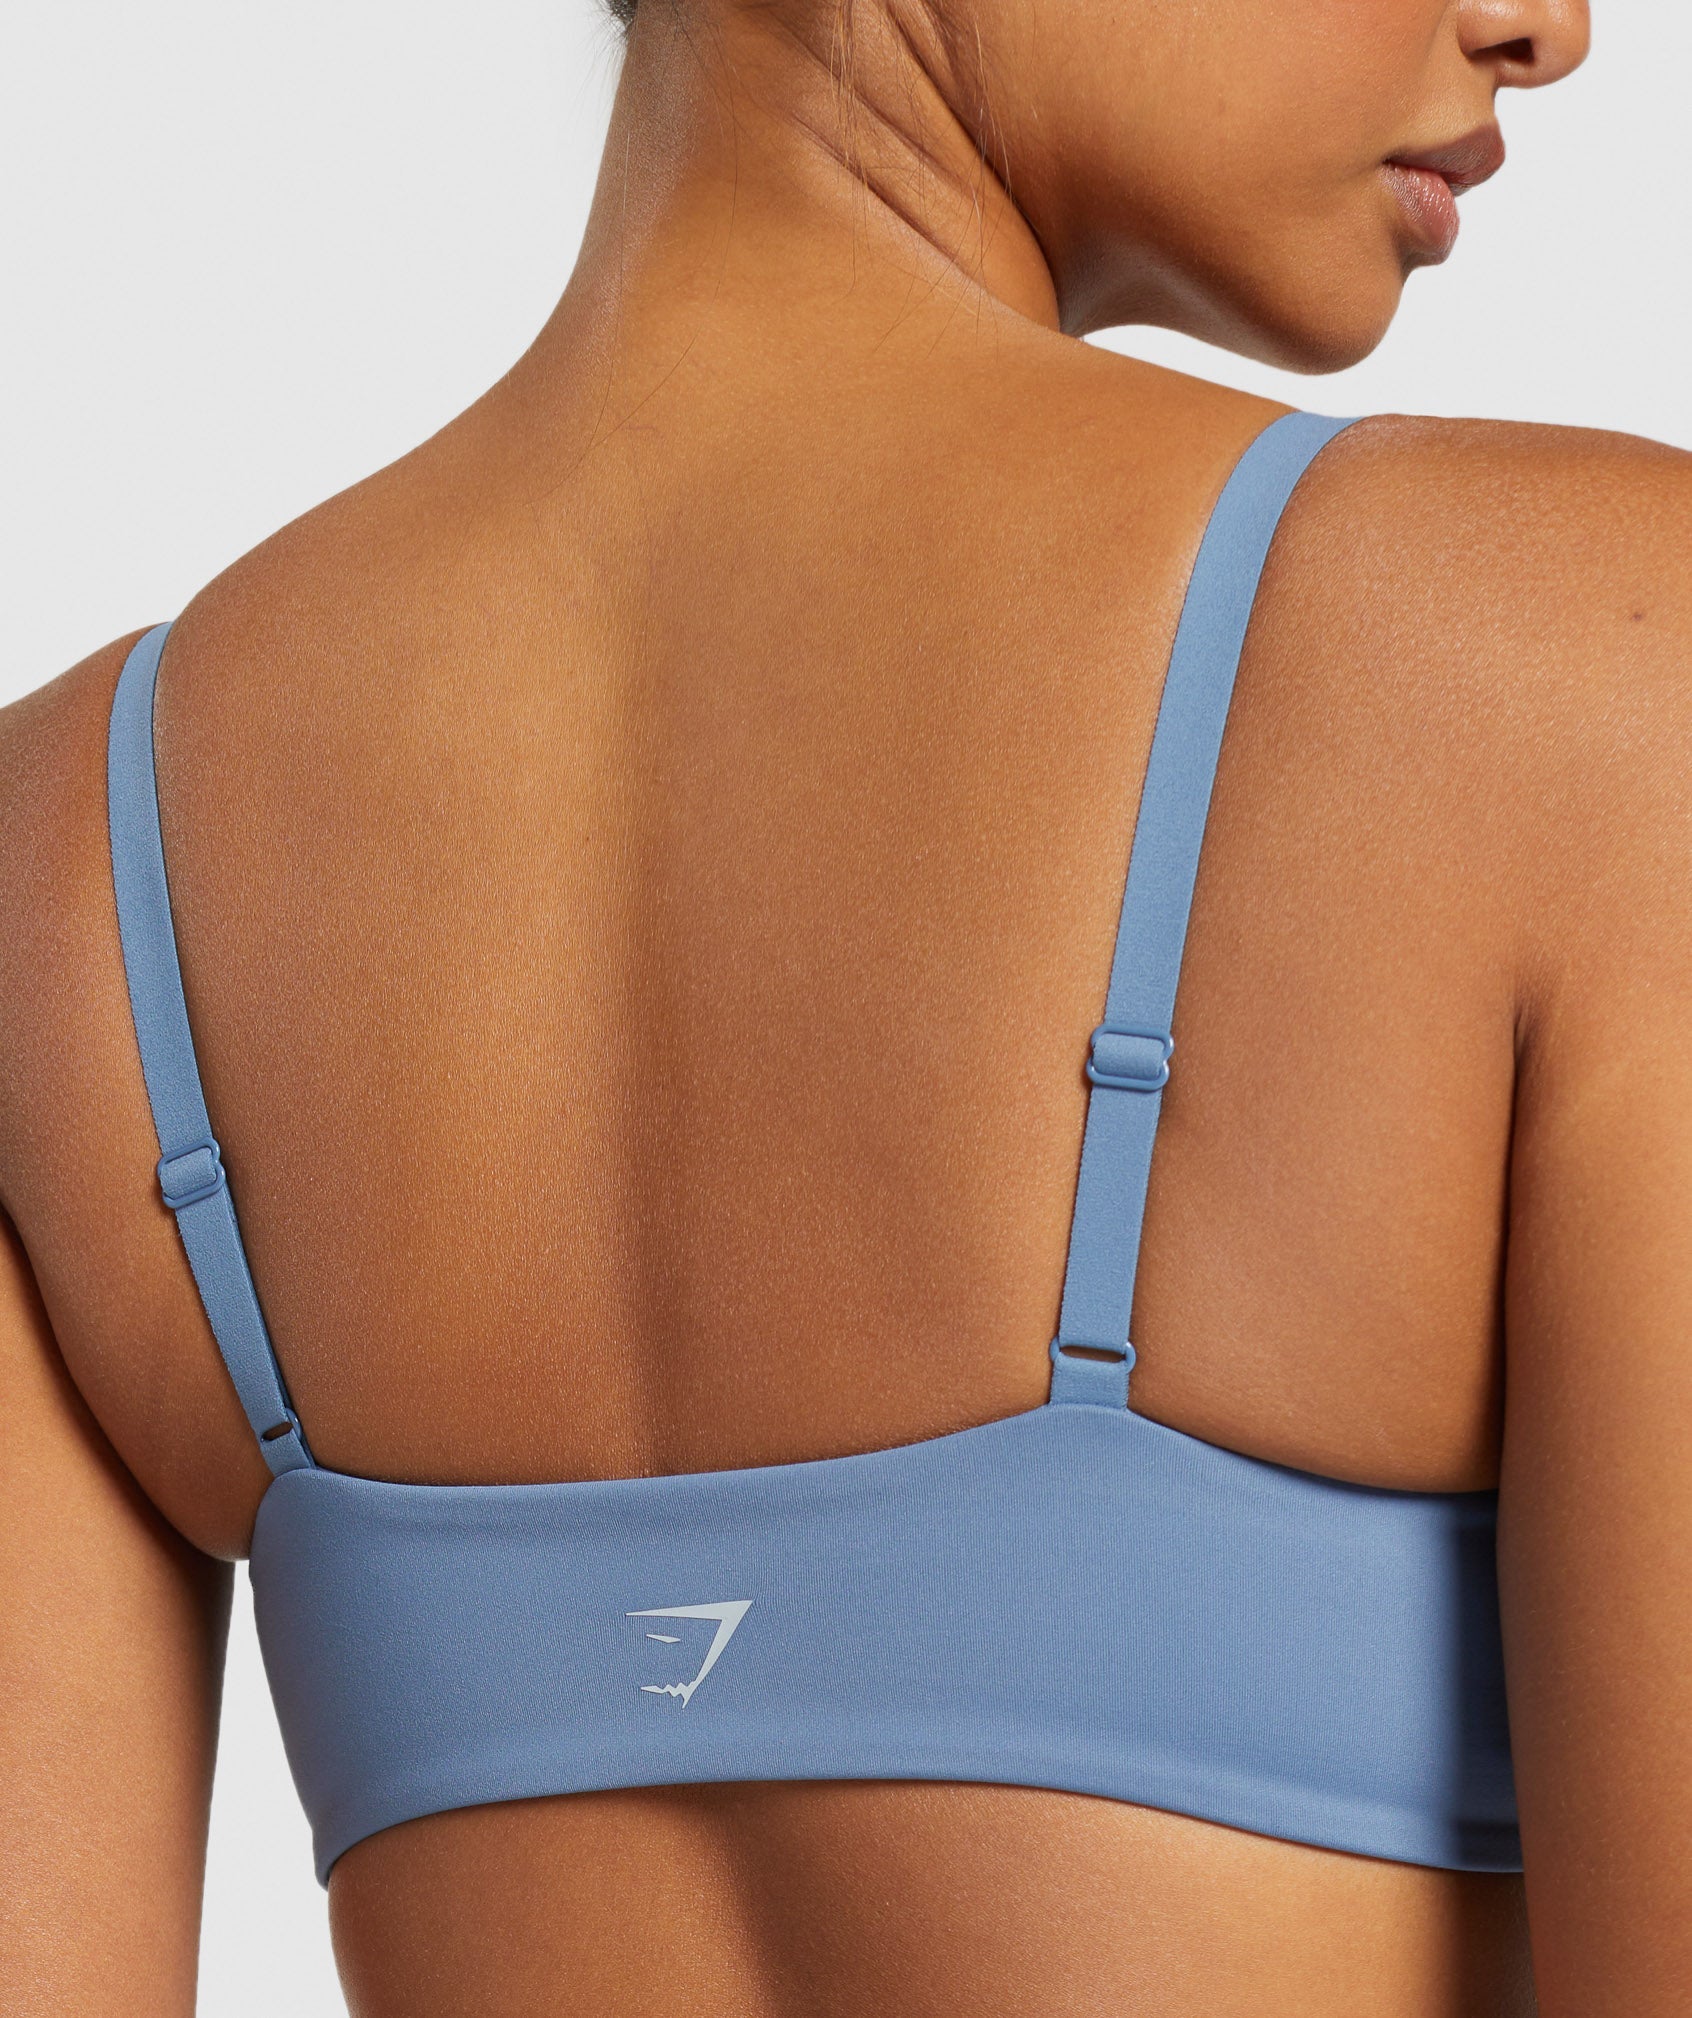 Elevate Twist Front Bralette in Faded Blue - view 5